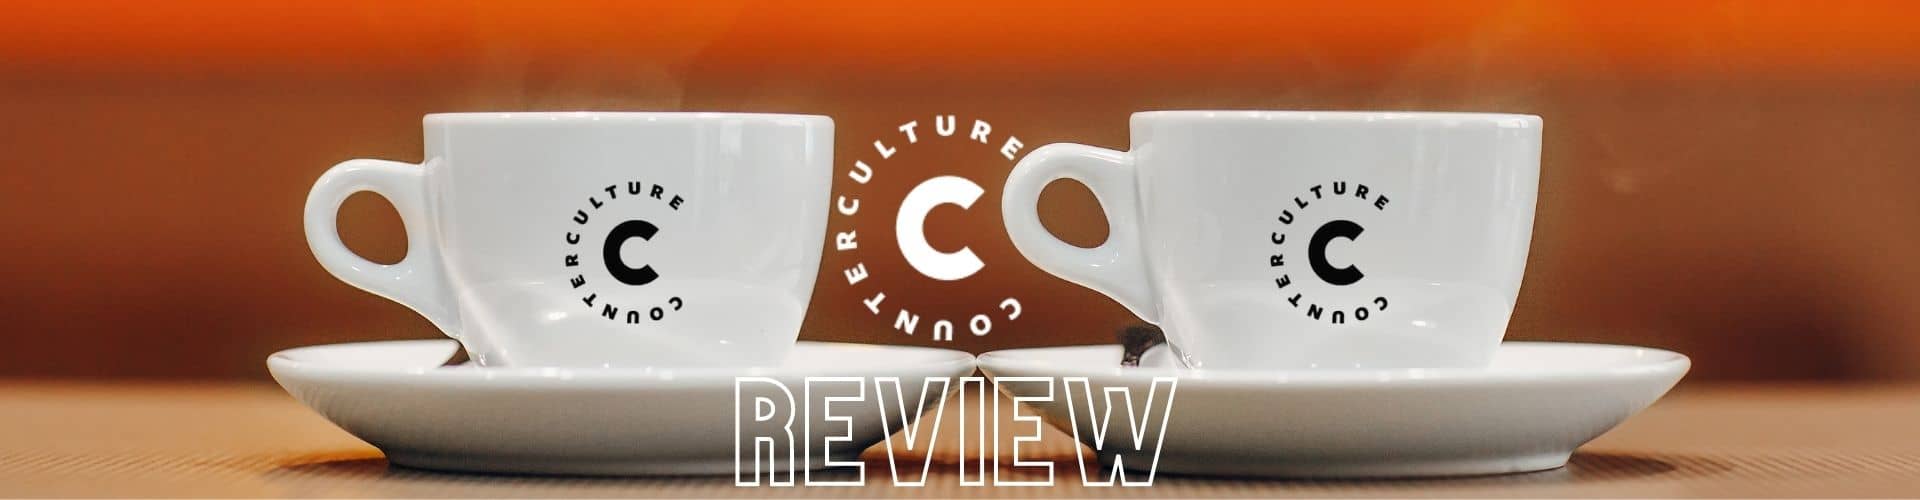 counter culture coffee banner image